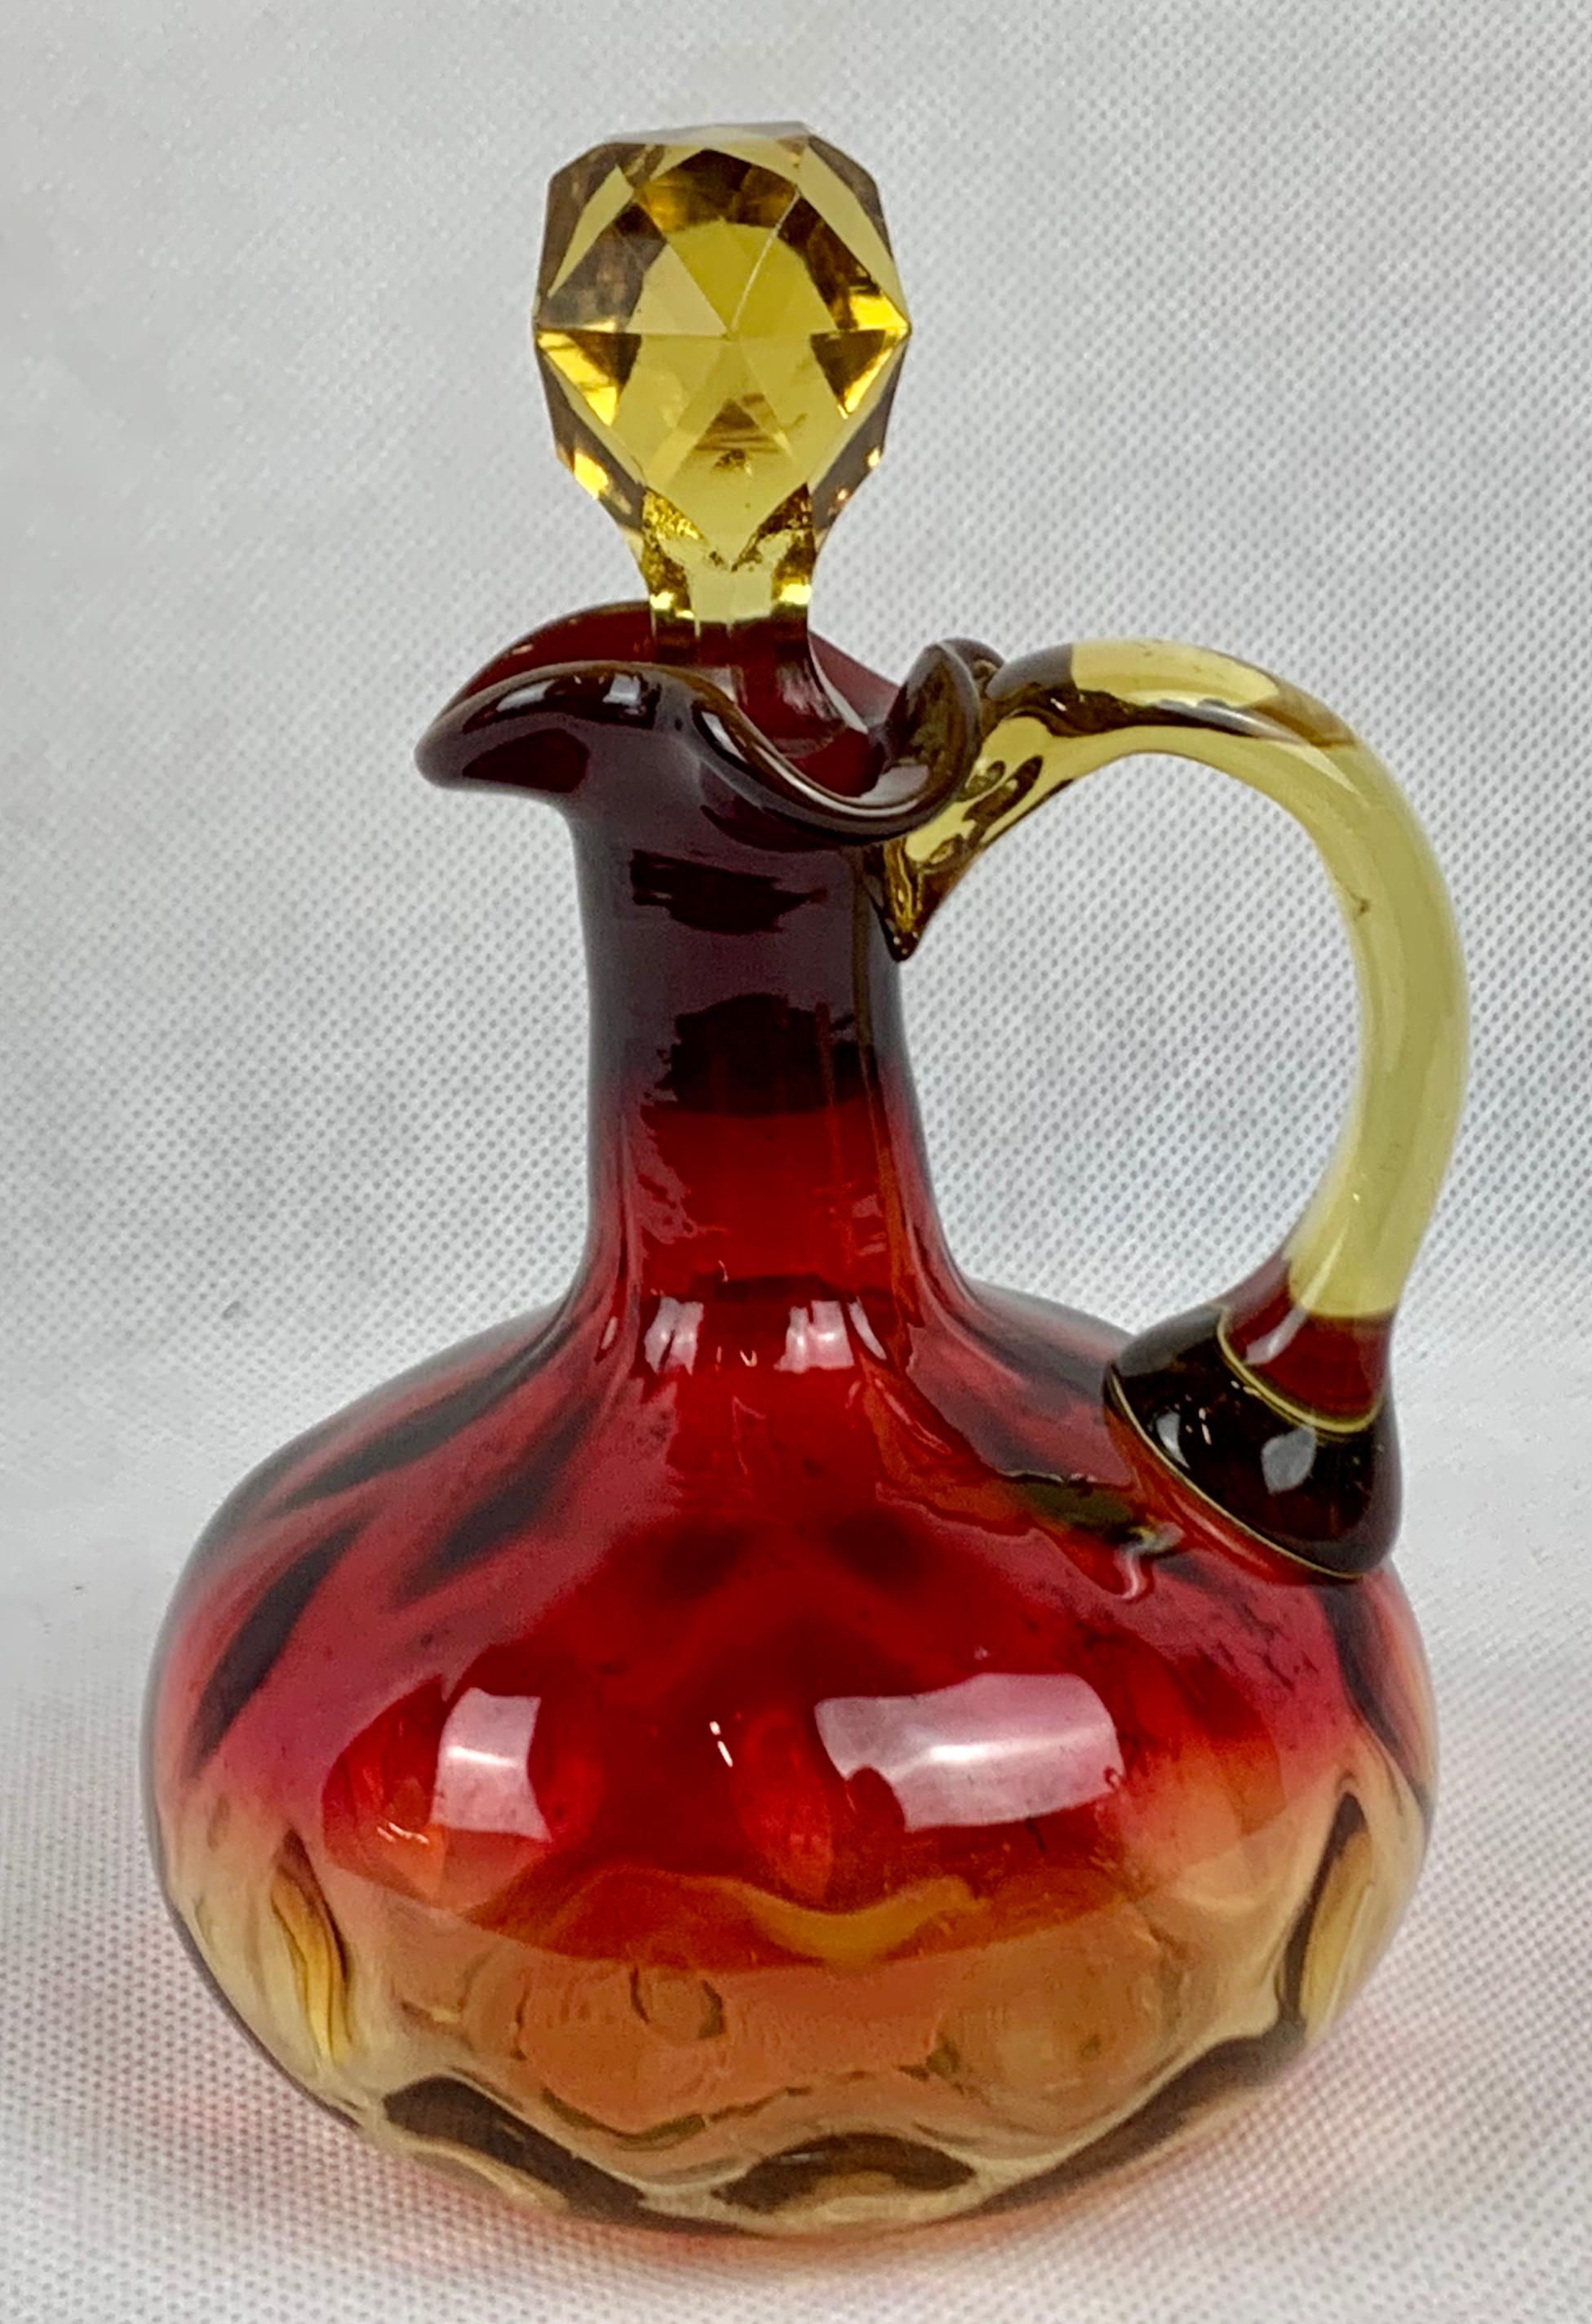 Amberina cruet attributed to the Mount Washington Glass Company. The color was created in 1883 by Joseph Lock by adding gold powder to amber glass. The body is in the inverted thumbprint pattern with a polished pontil on the base. The color fades